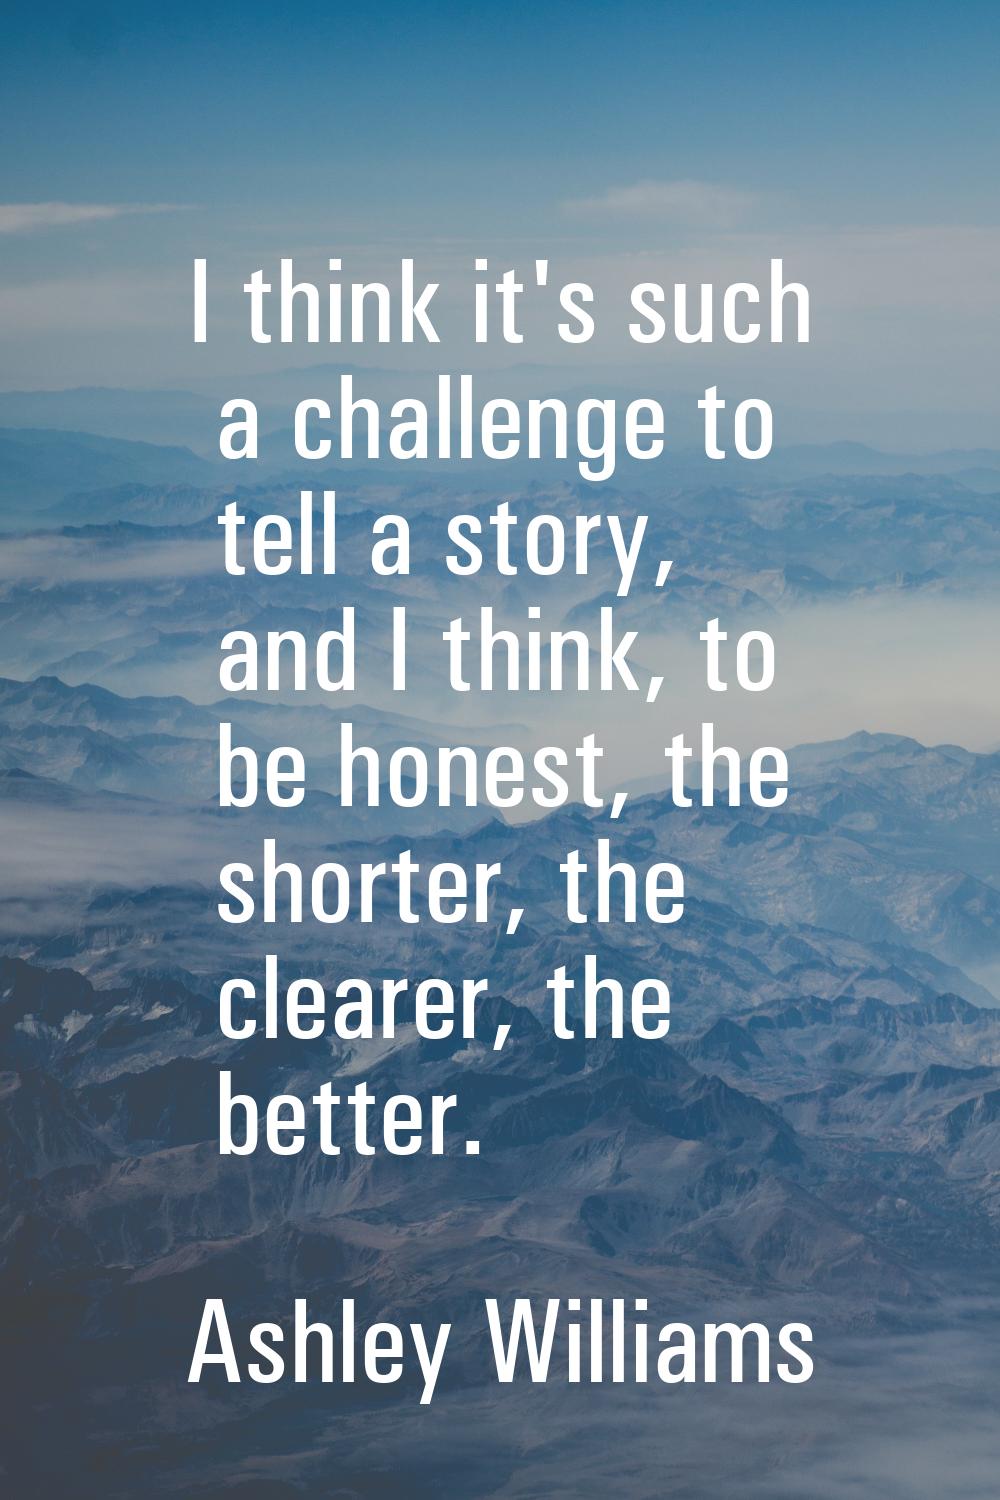 I think it's such a challenge to tell a story, and I think, to be honest, the shorter, the clearer,